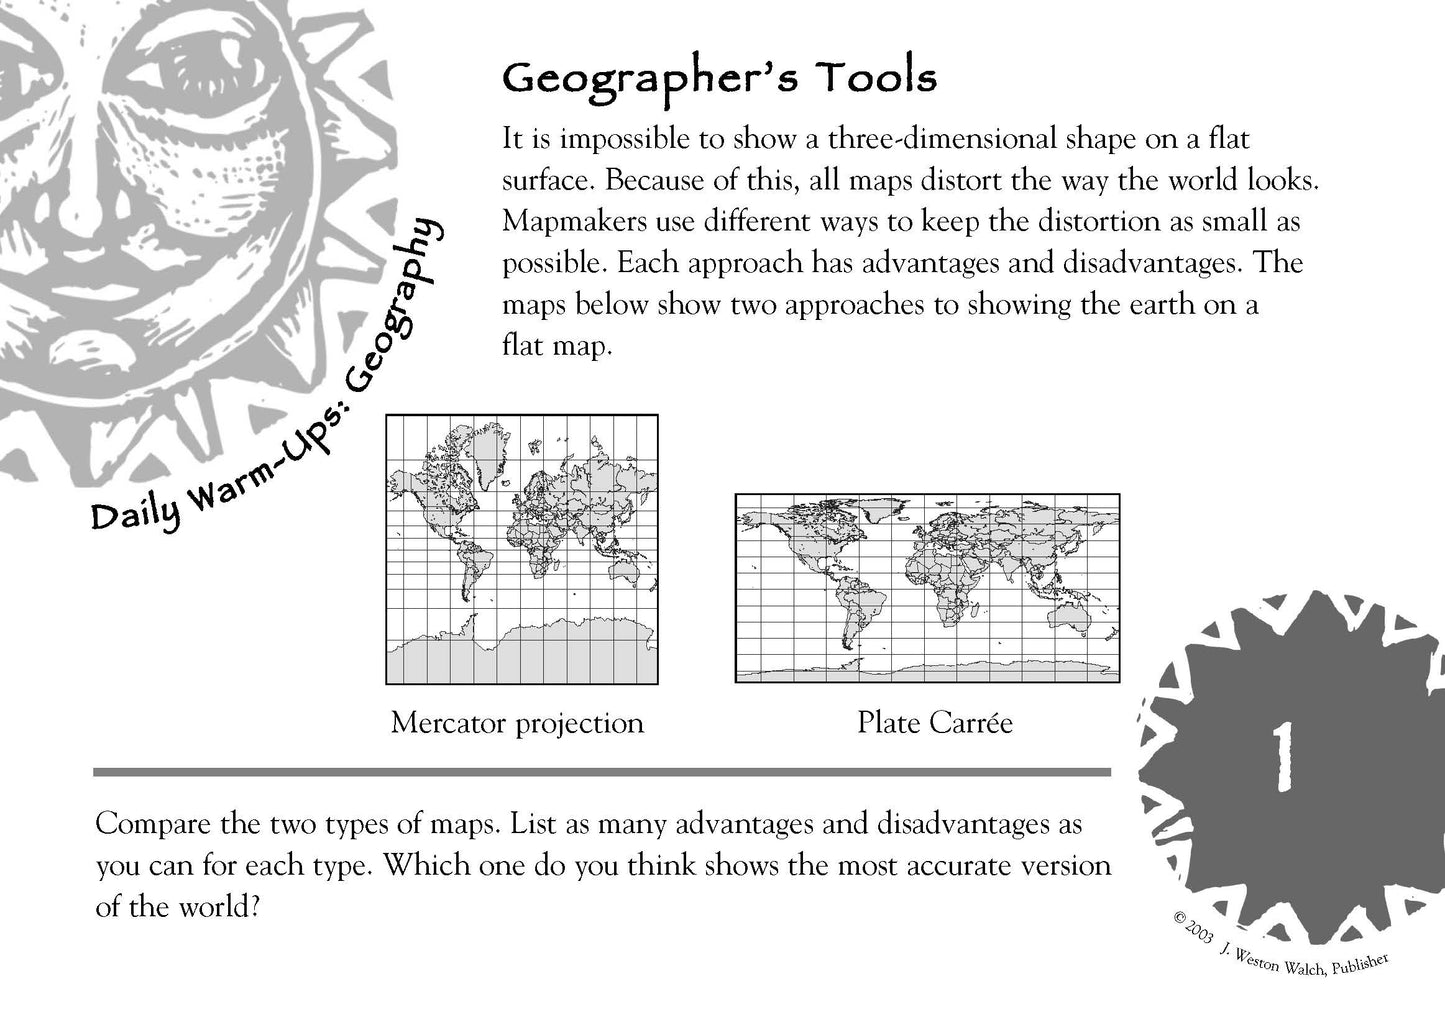 Geography teachers, Humanities curriculum, Secondary school resources, Daily warm-ups, National geography standards, Geography concepts and skills, Geography Learning, Geography Resources for the Classroom, Educational School resources, Geography Classroom Resources 